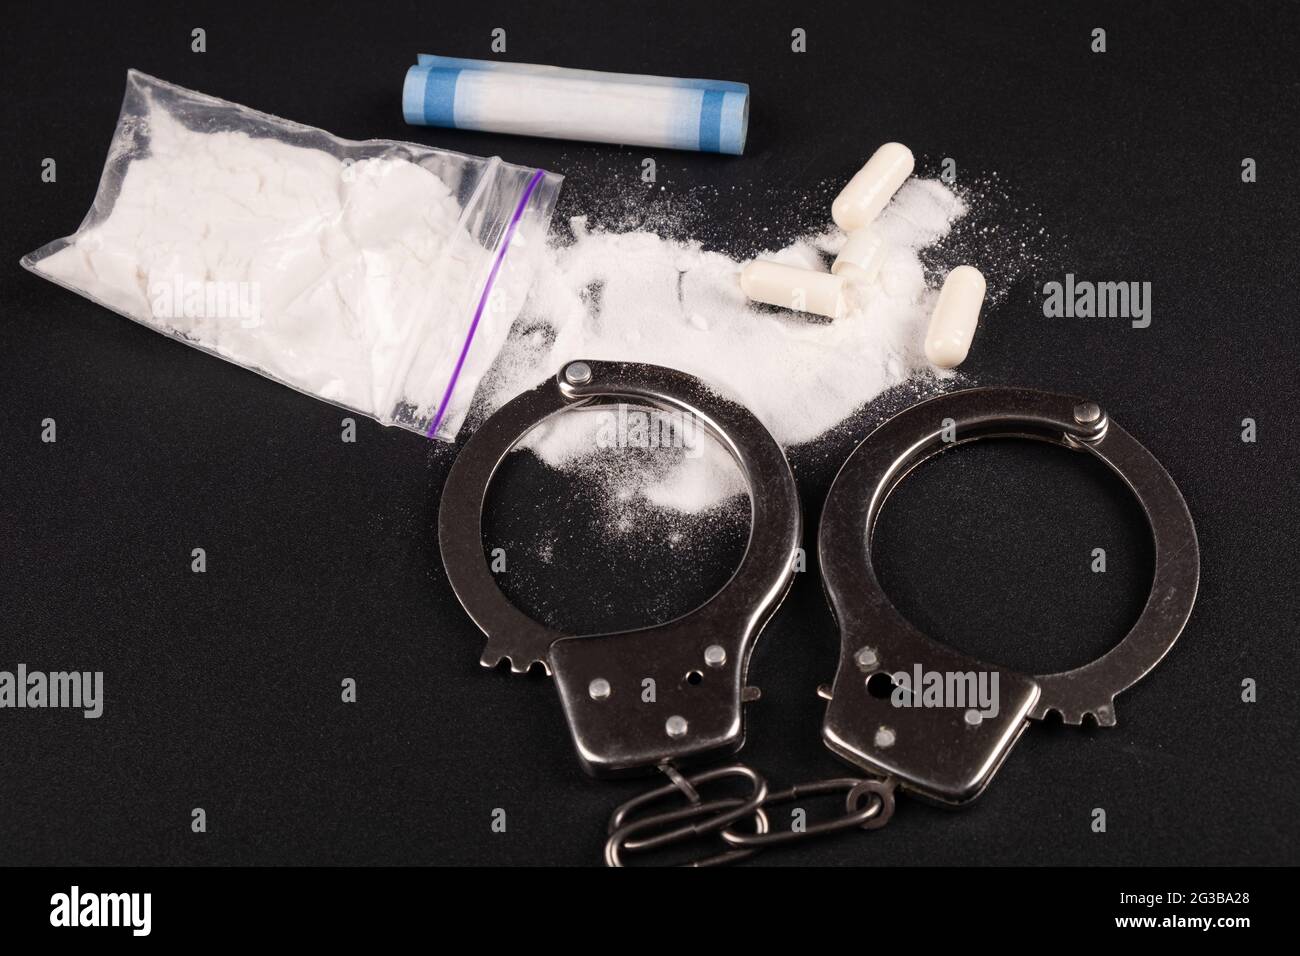 arrest of a drug dealer, handcuffs and cocaine white powder. Stock Photo